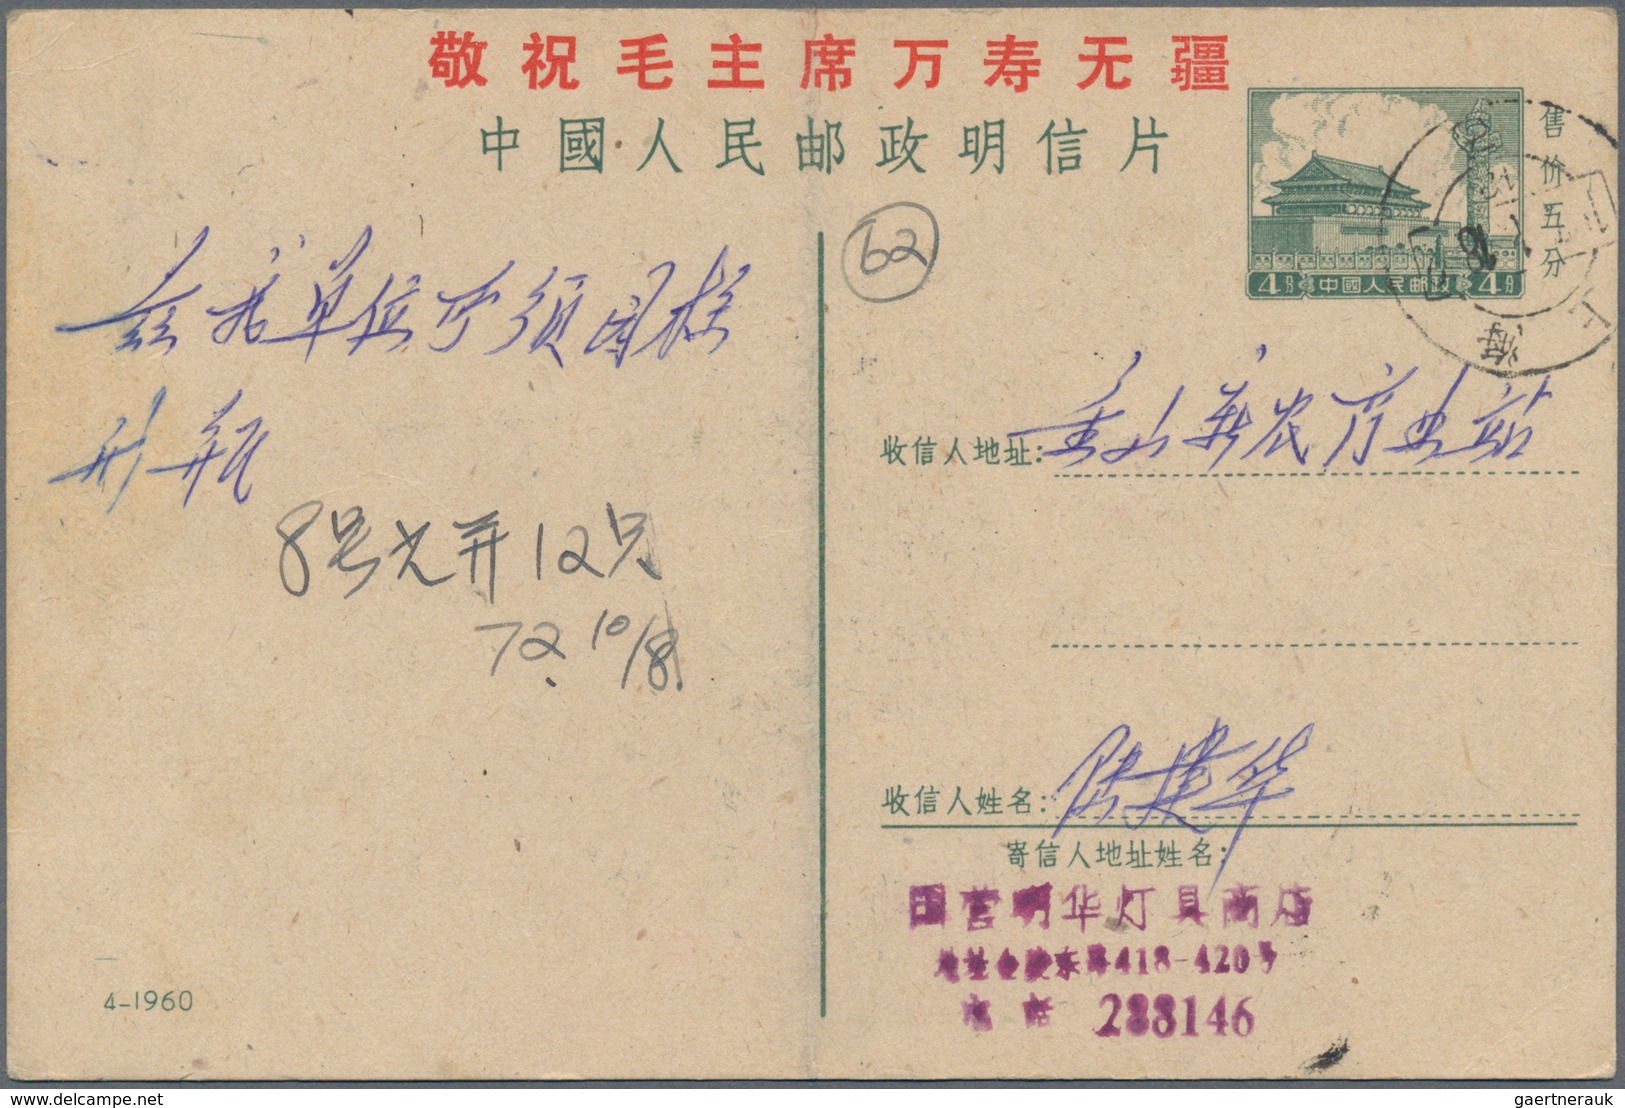 China - Volksrepublik - Ganzsachen: 1952/81, collection of used only inland stationery cards (31) of